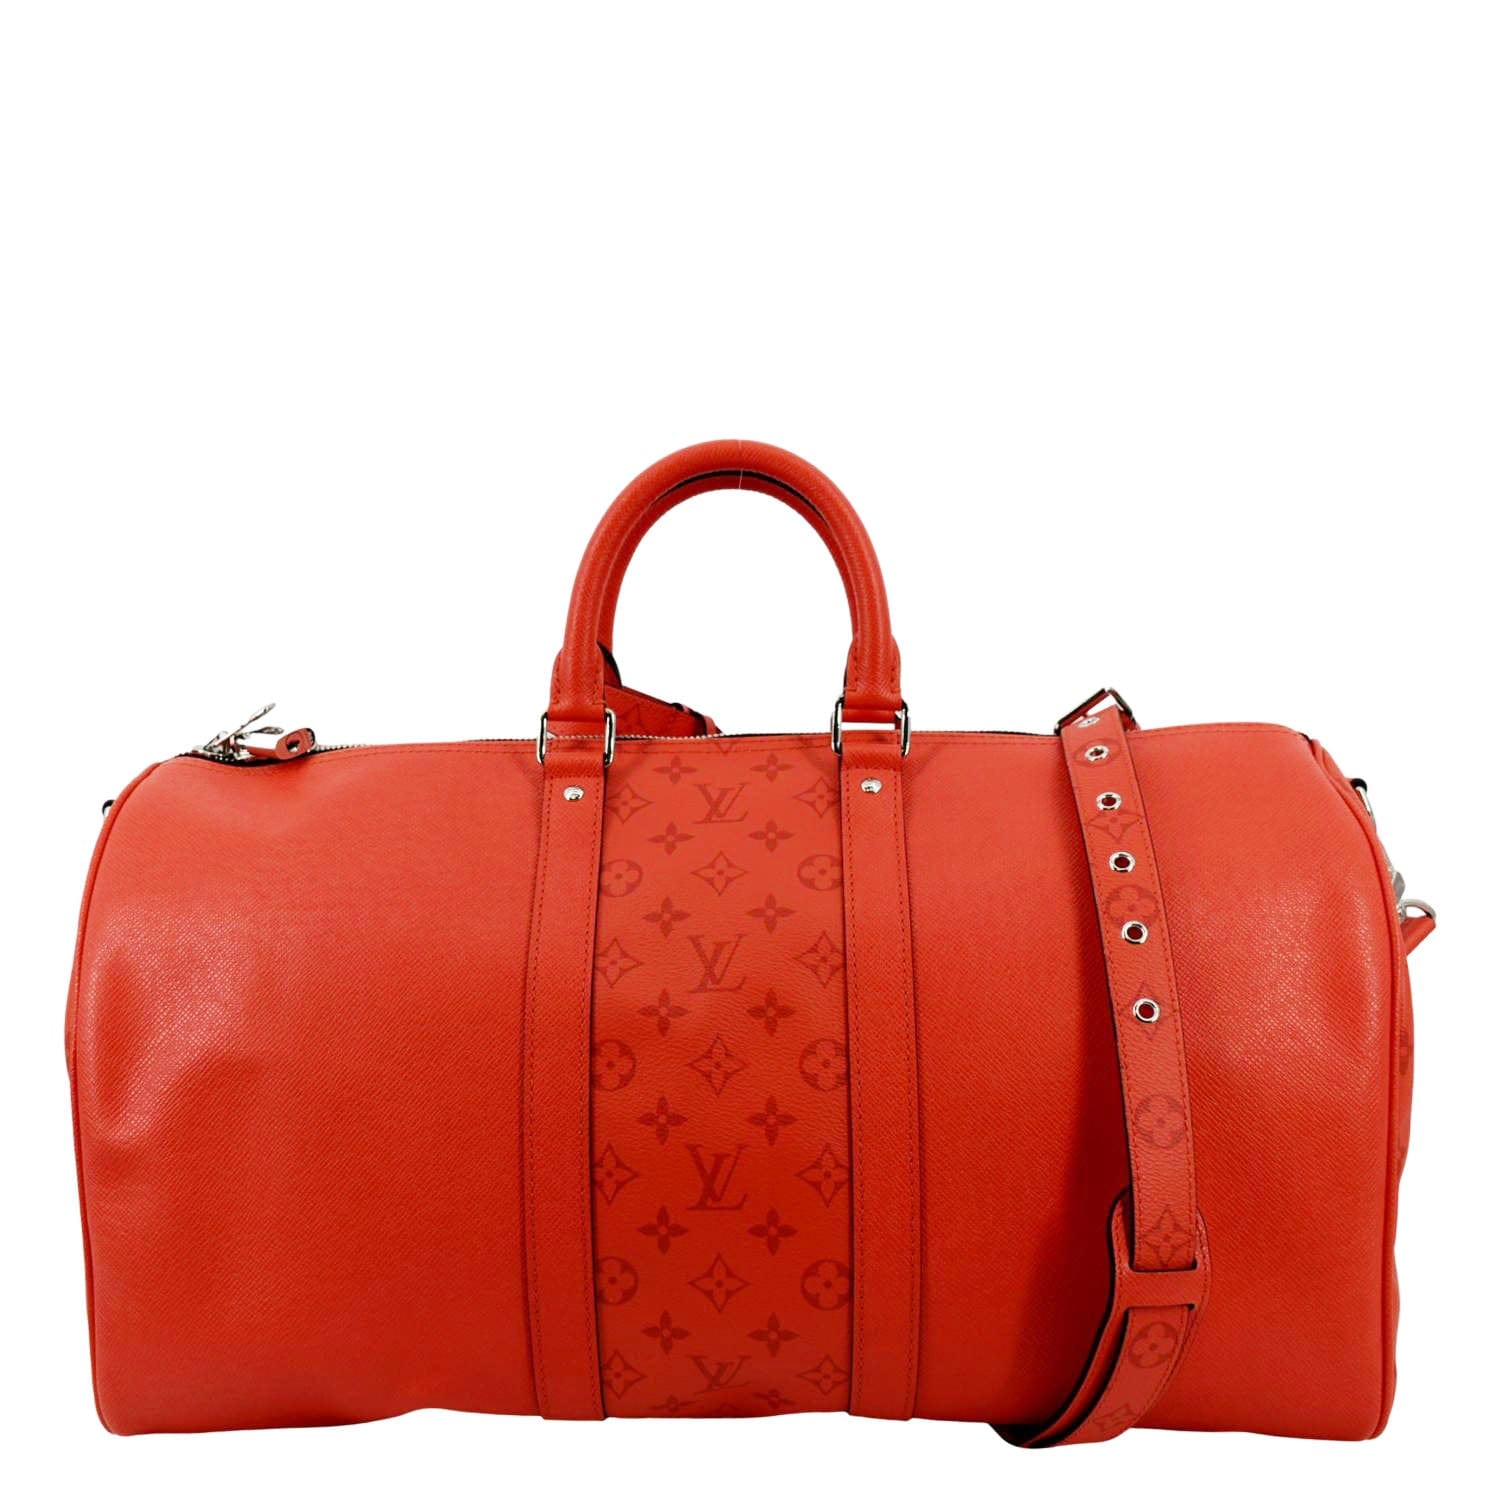 Louis Vuitton Keepall 50 Bandouliere Monogram Taiga Leather Travel Bag Red